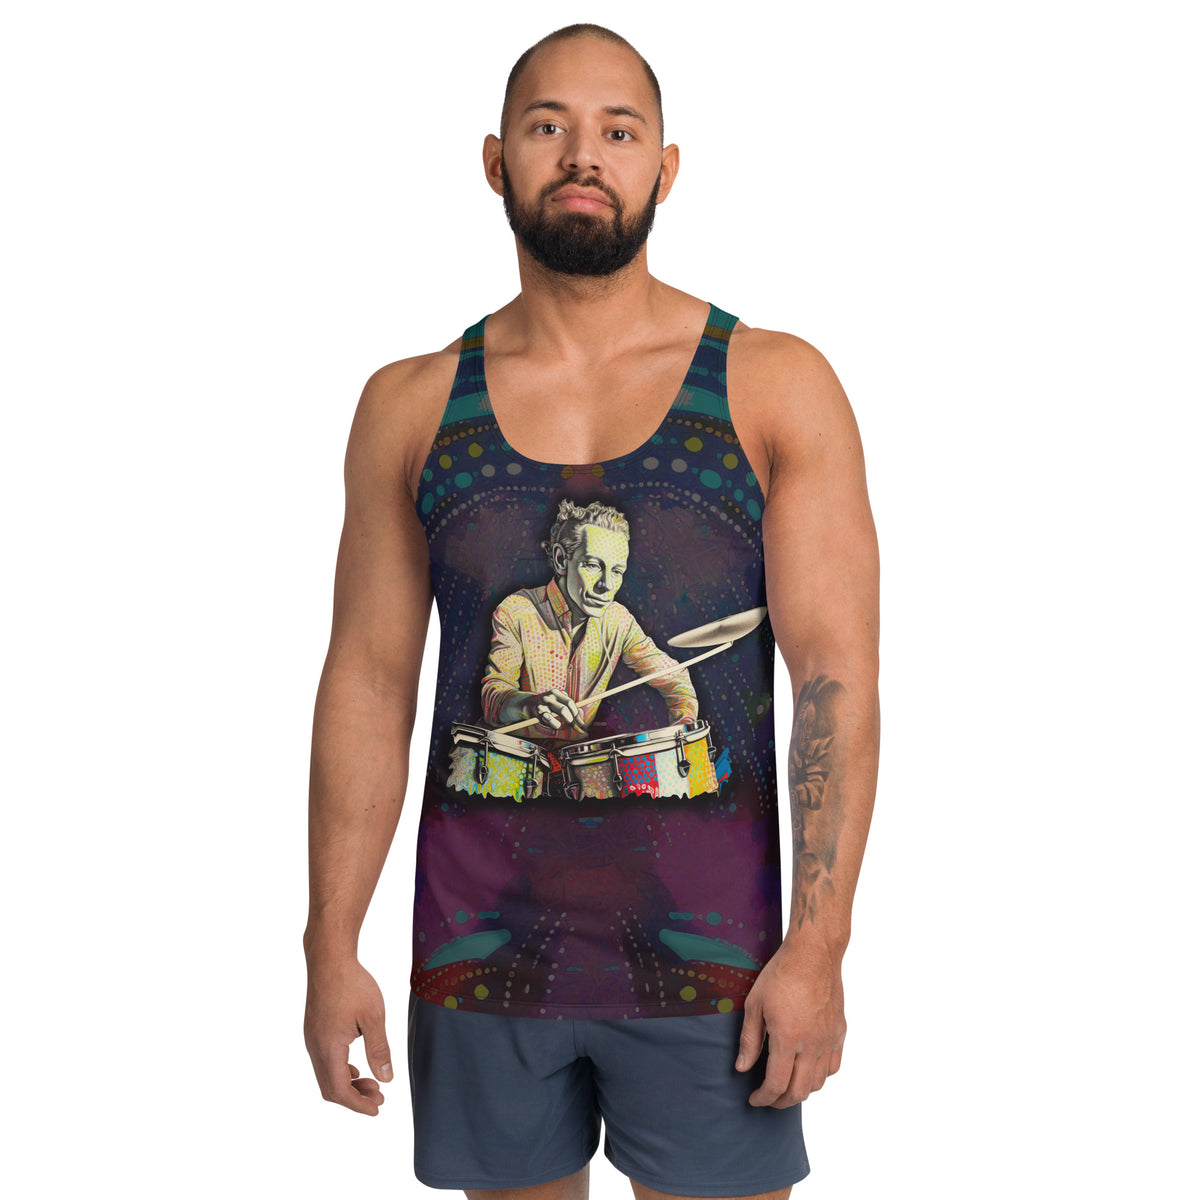 Floral Fantasy Men's Tank Top on a clothing mannequin.